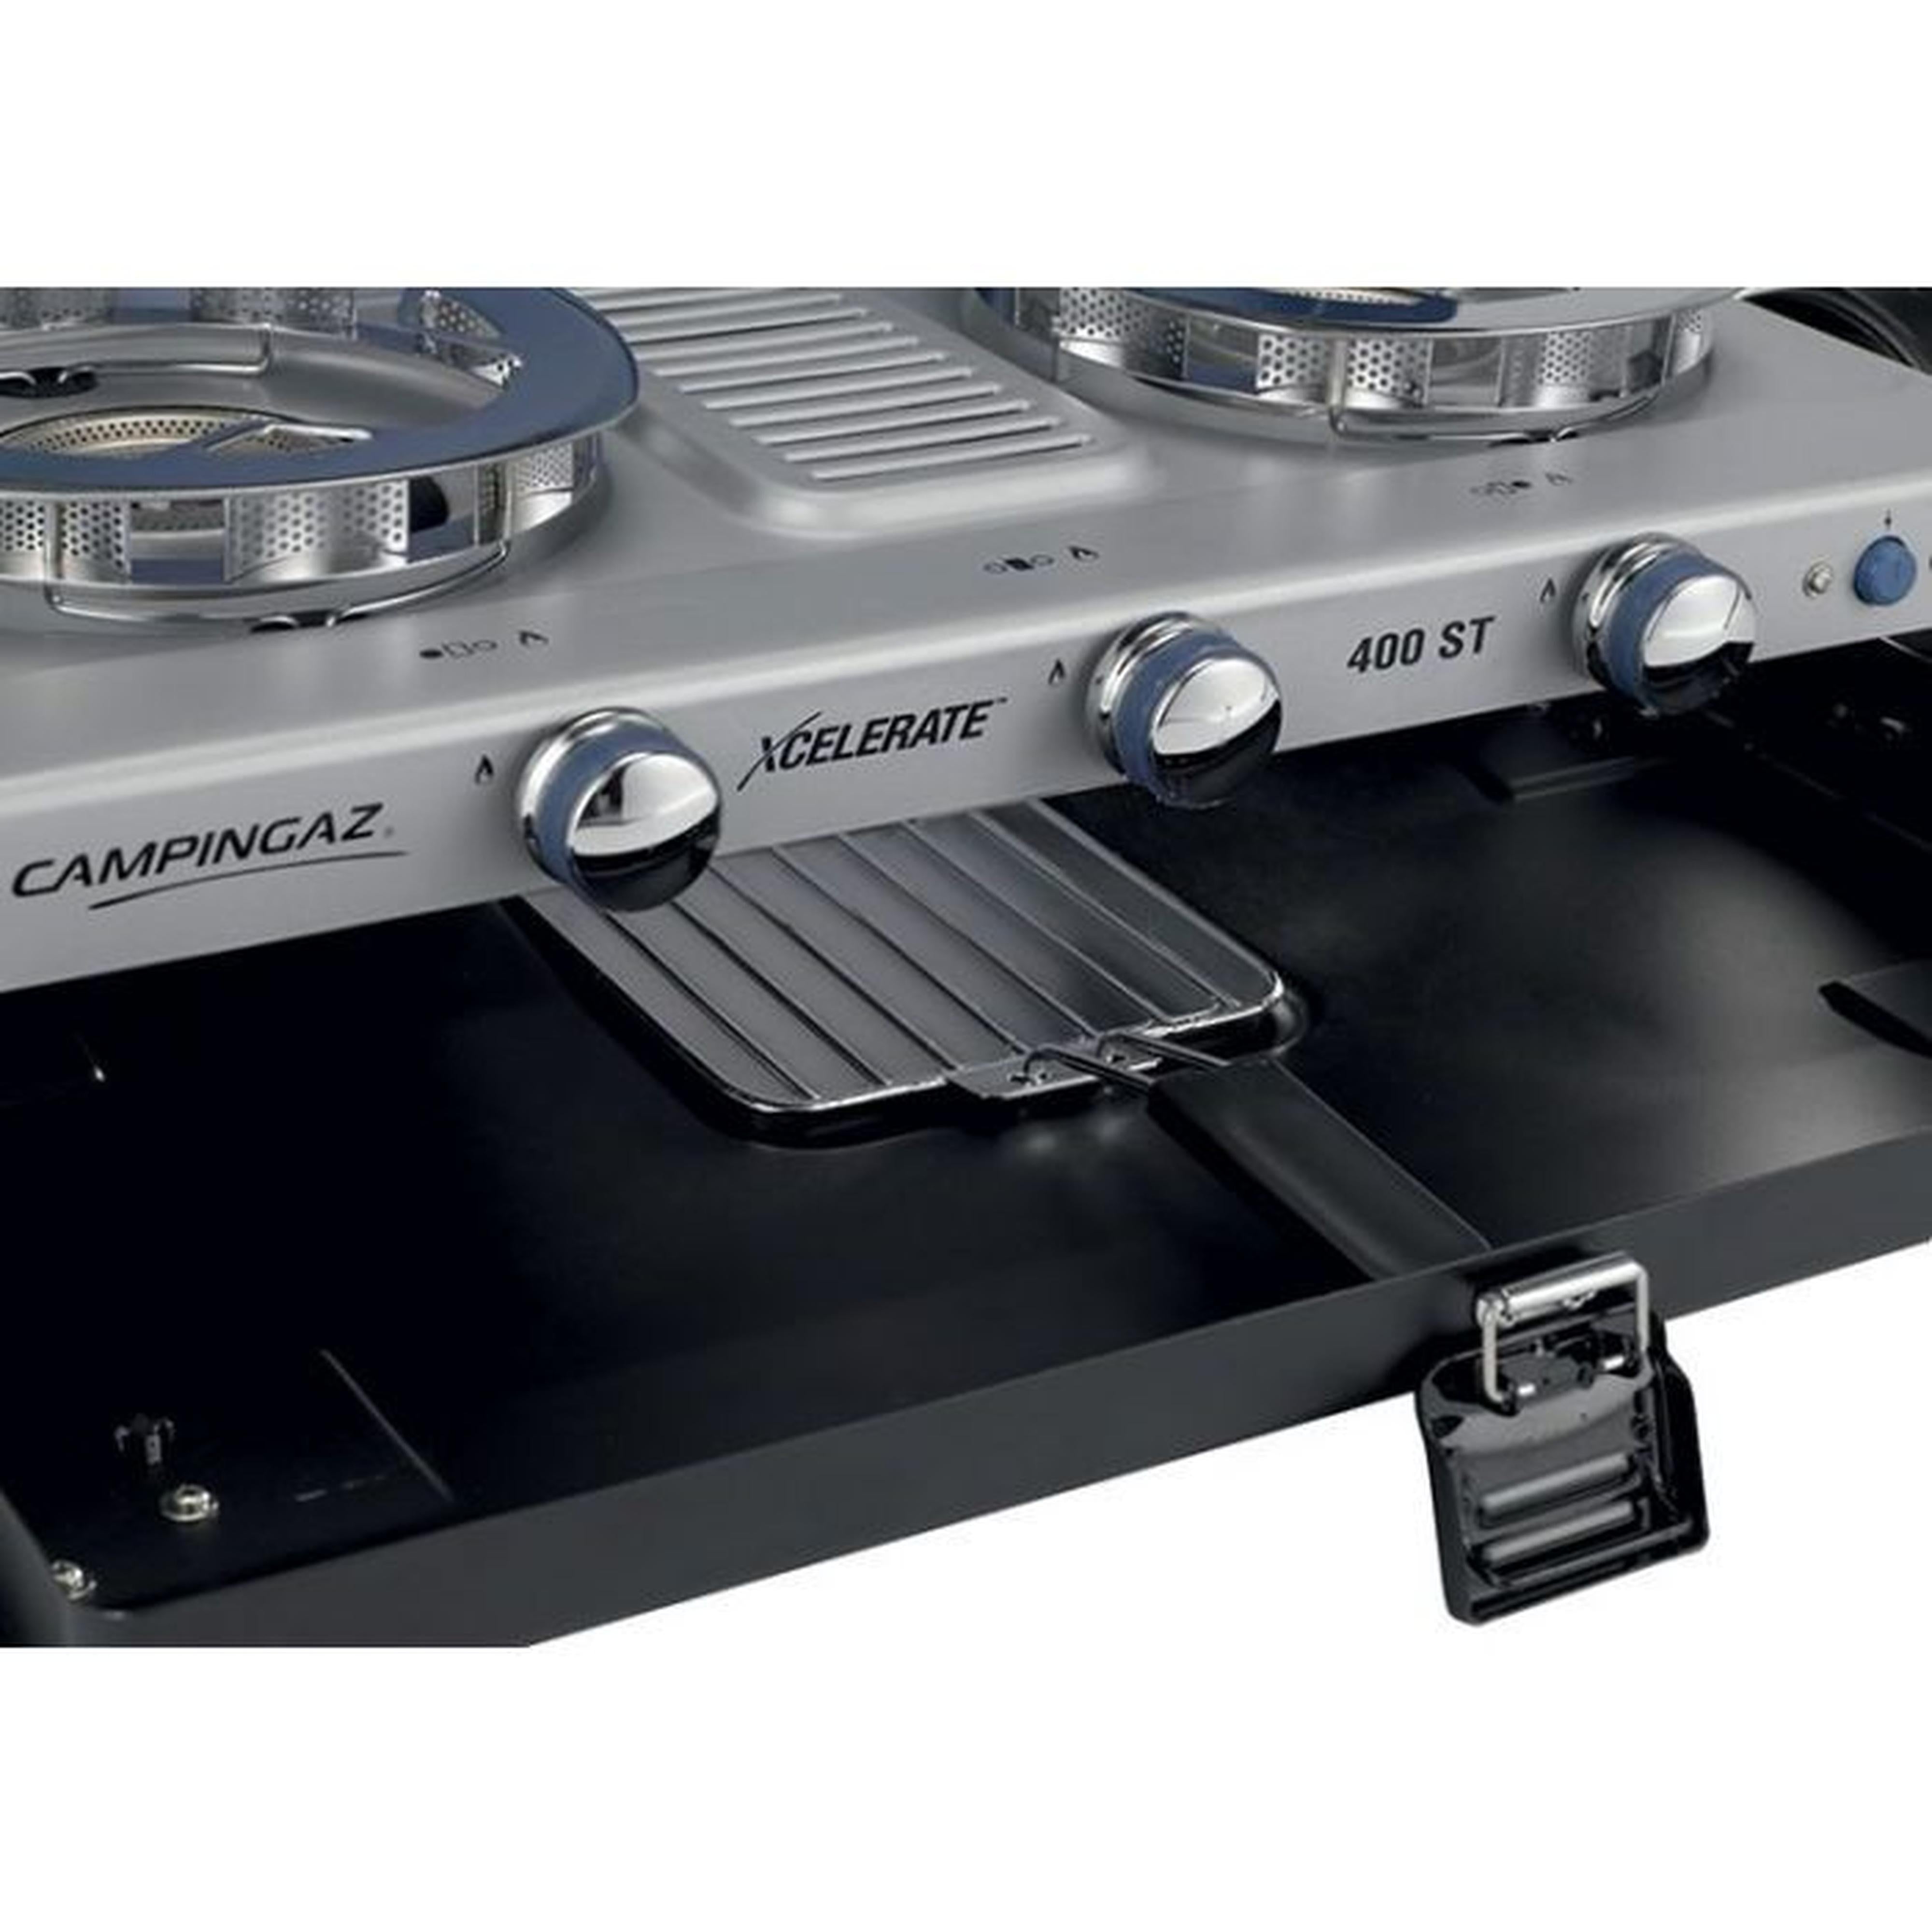 Campingaz 400ST Xcelerate Gas Stove & Grill